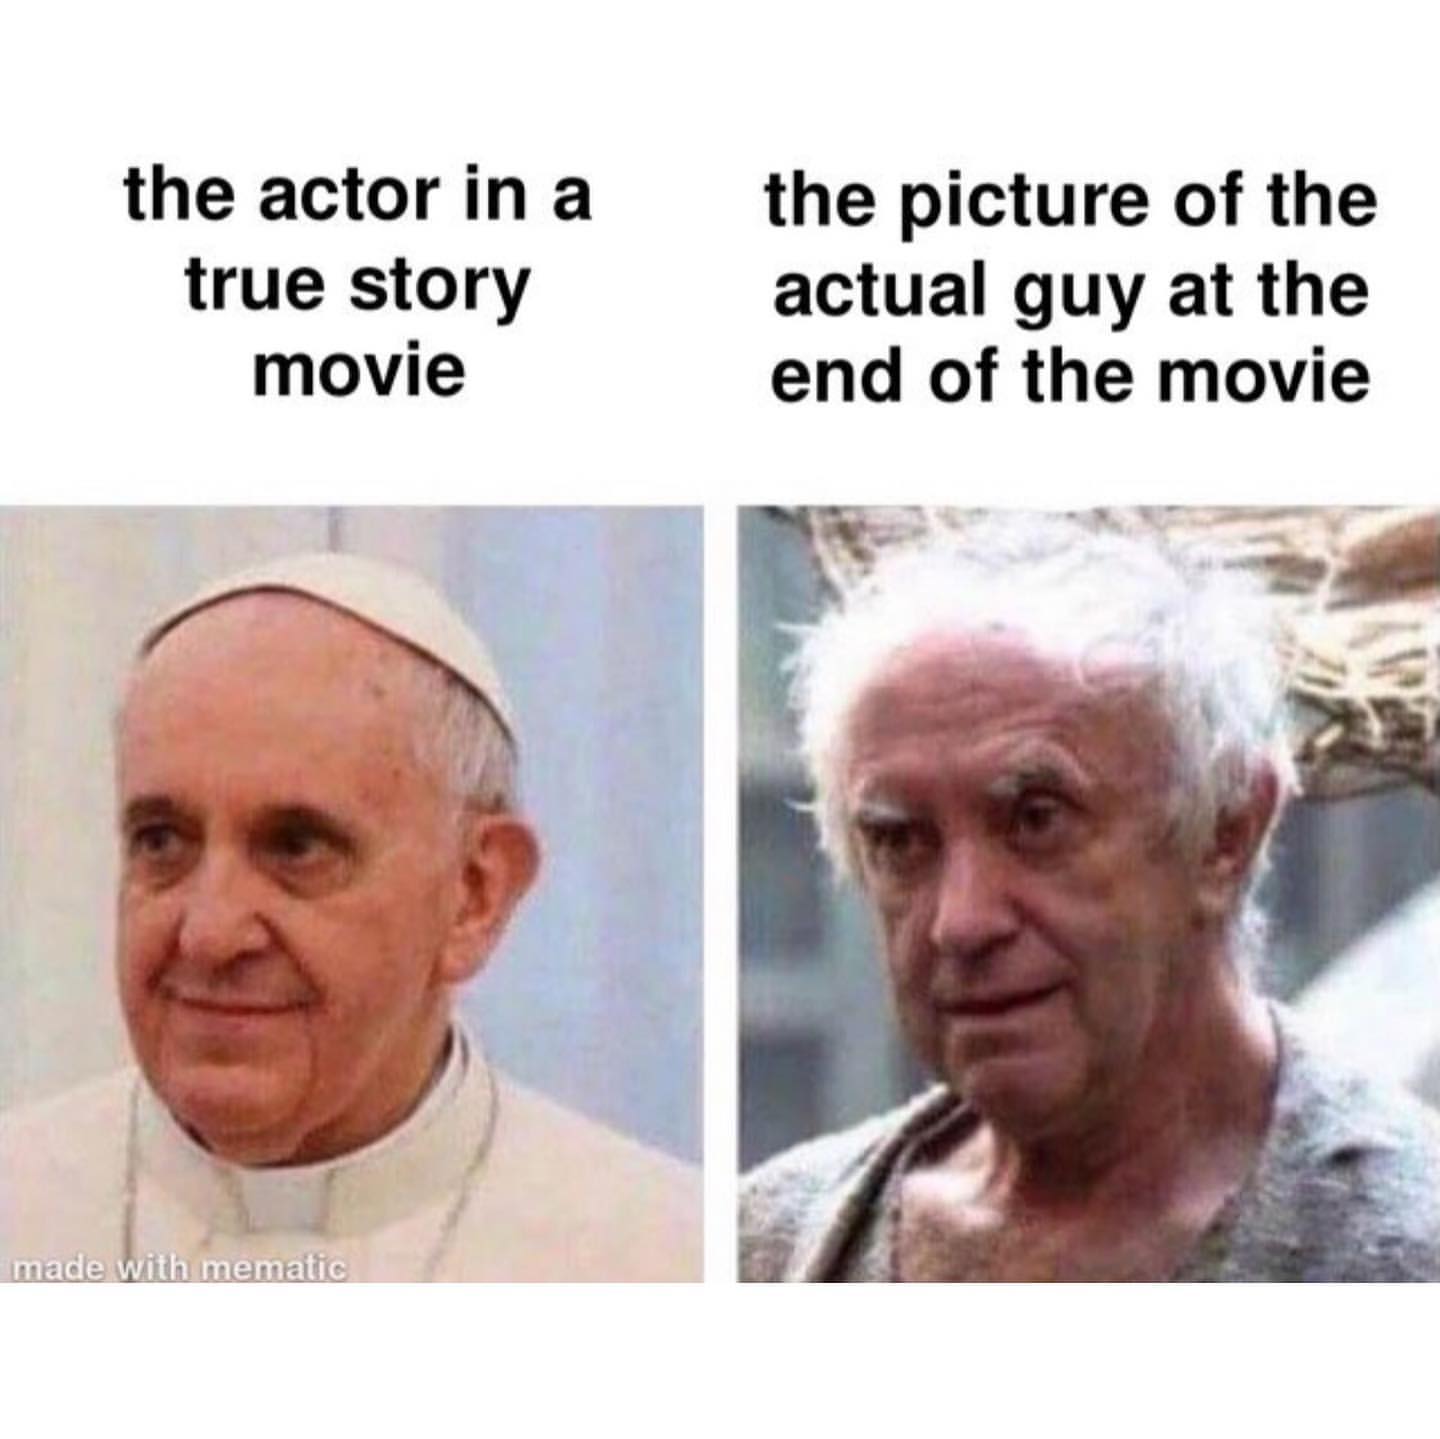 The actor in a true story movie. The picture of the actual guy at the end of the movie.